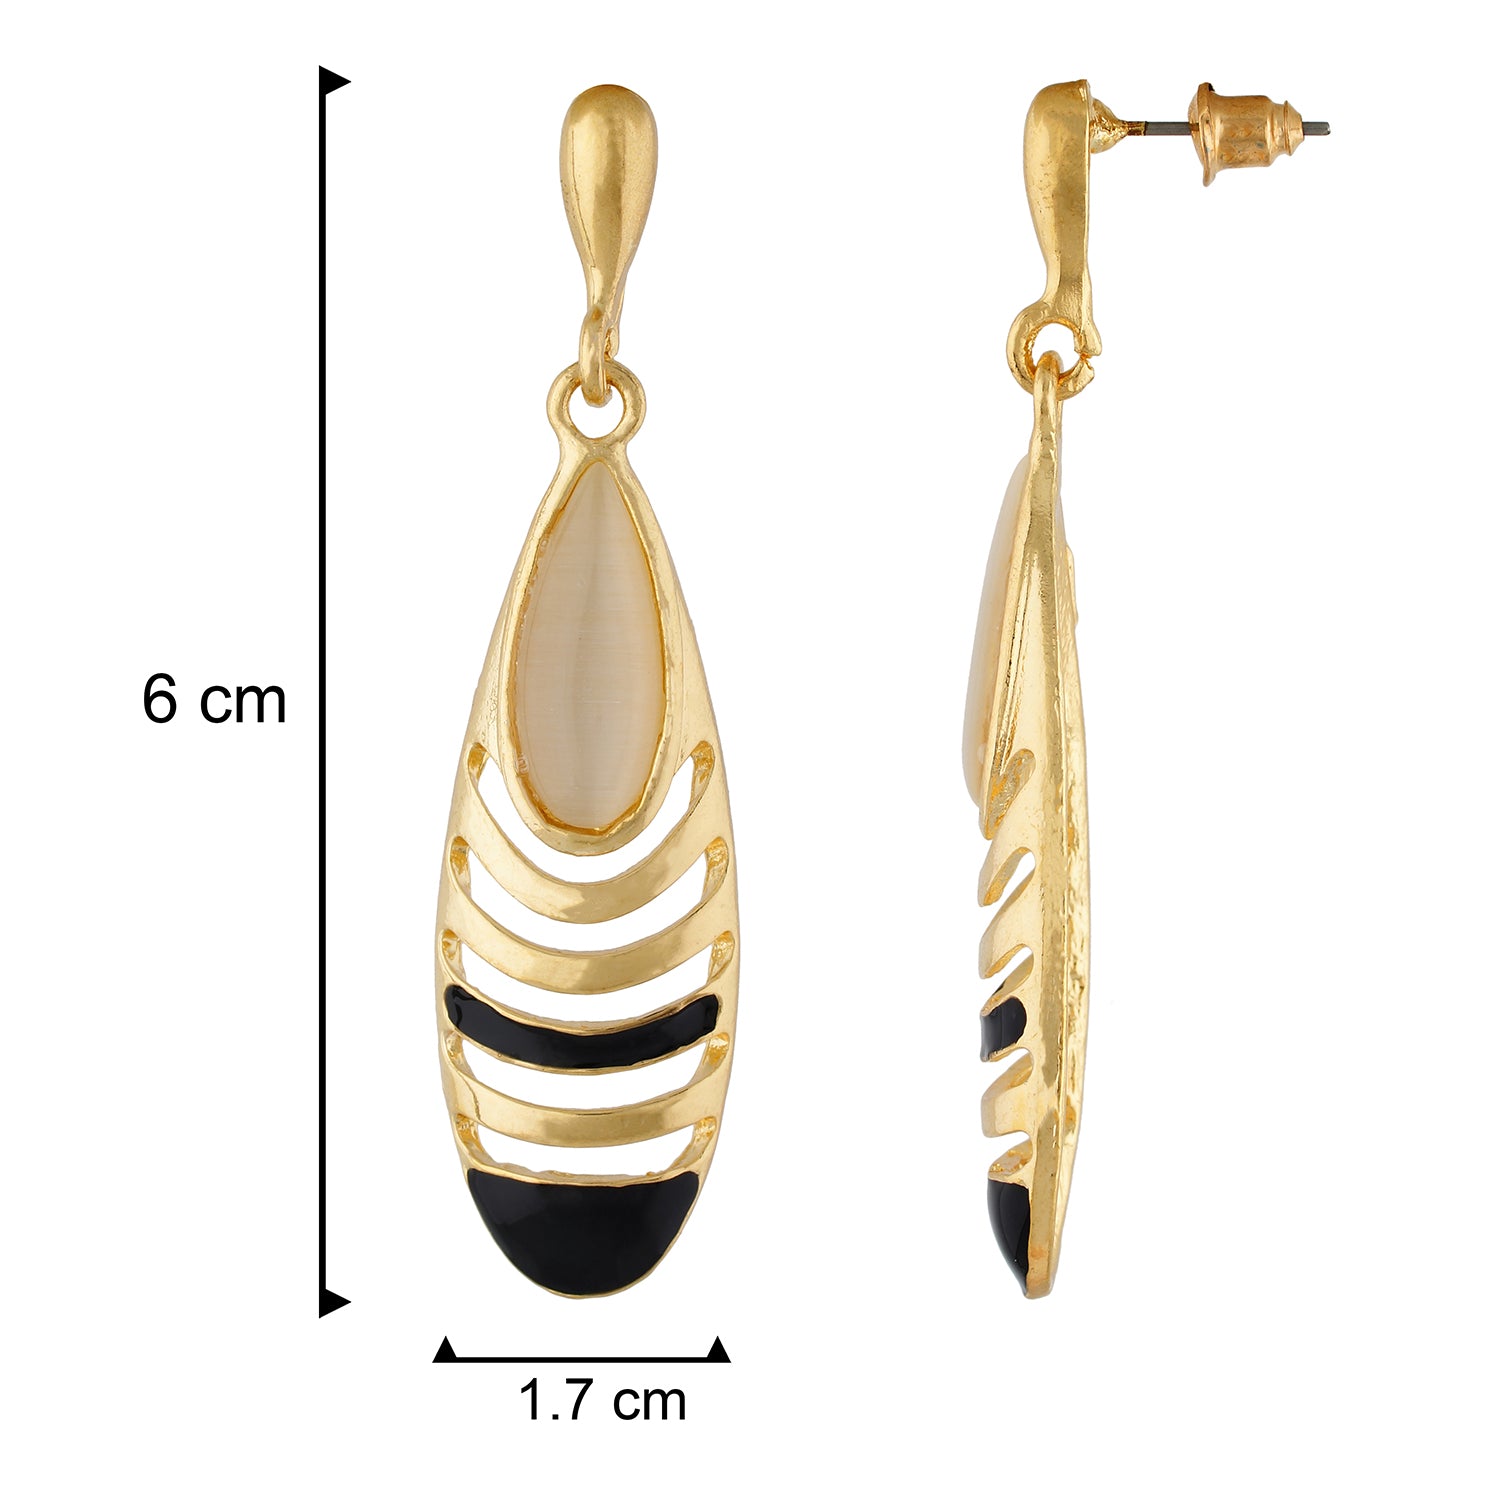 Trendy Black and Gold Colour Drop Shape Earring for Girls and Women